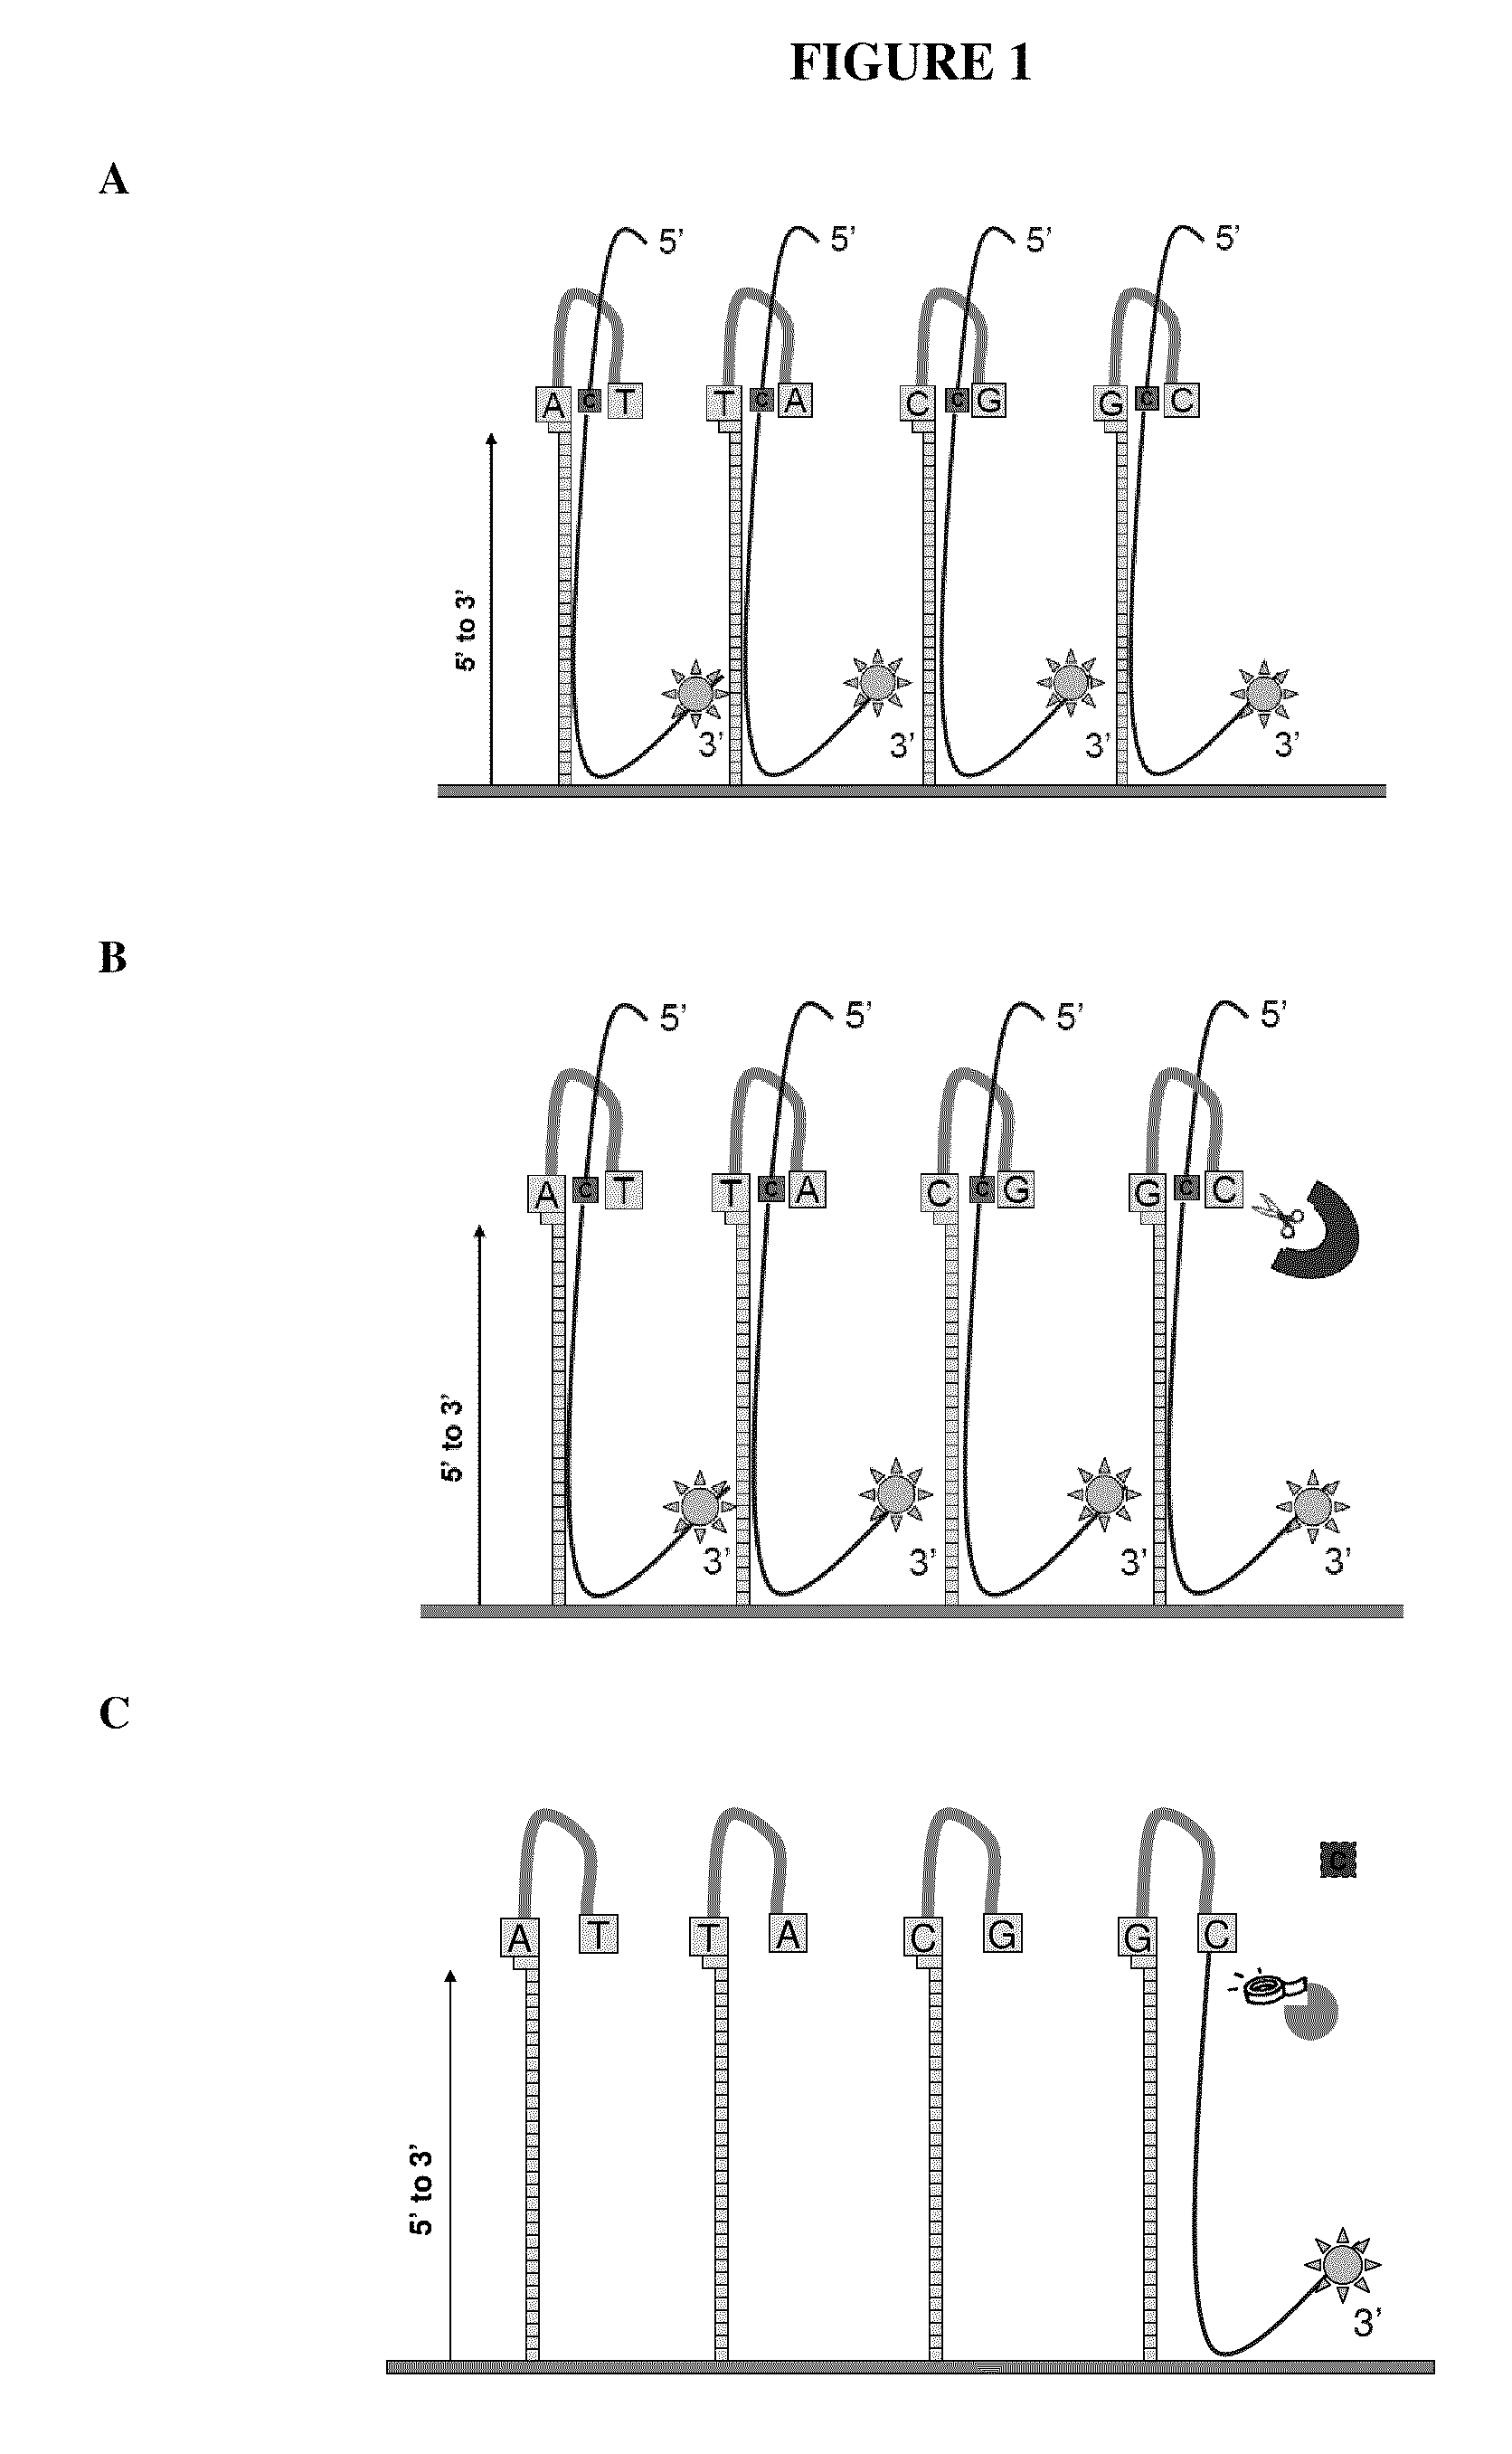 Methods and Assays for Capture of Nucleic Acids